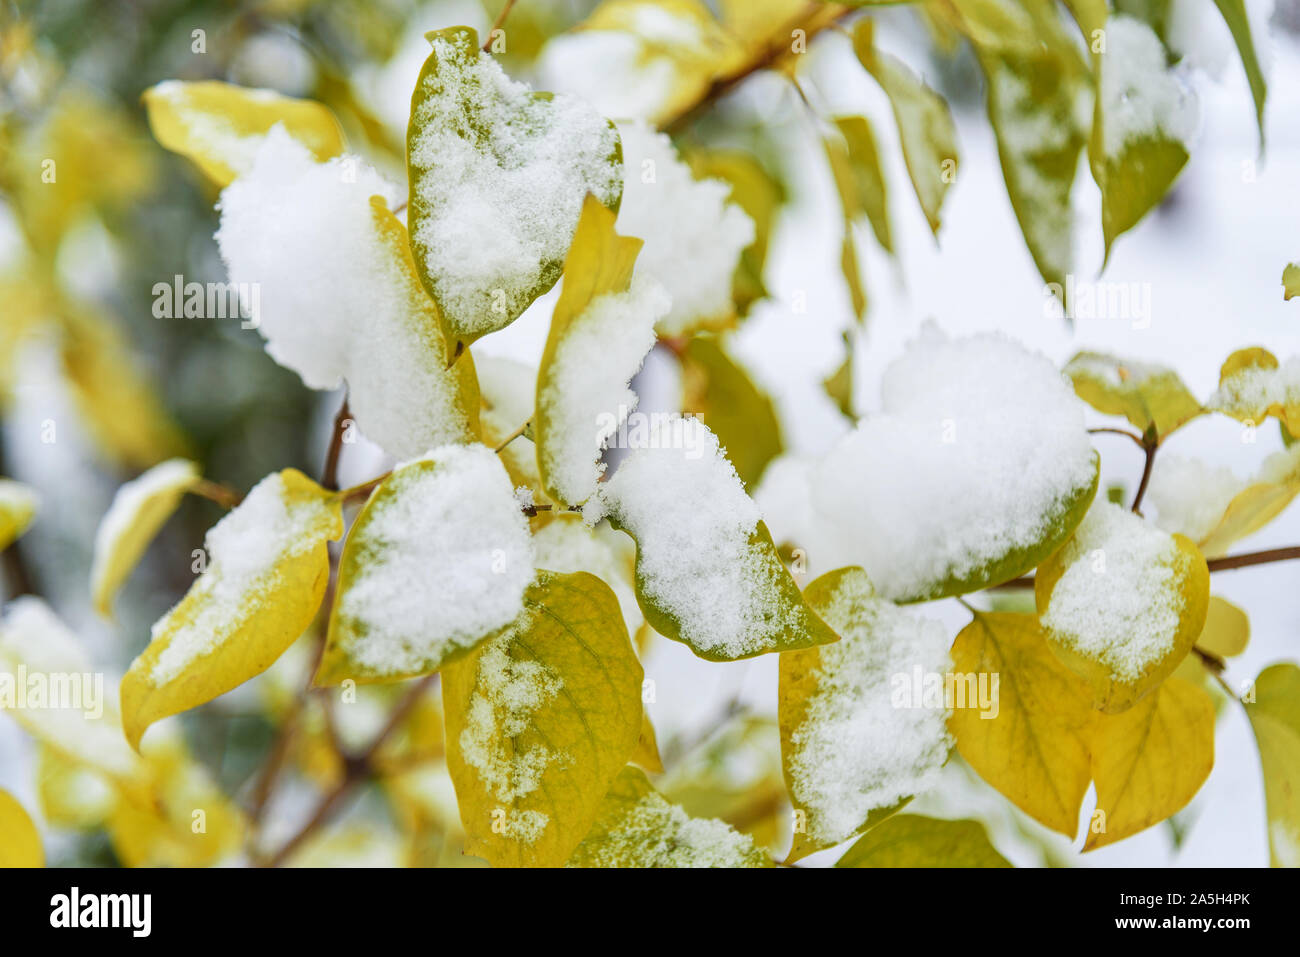 First snow on branch with yellow leaves Stock Photo